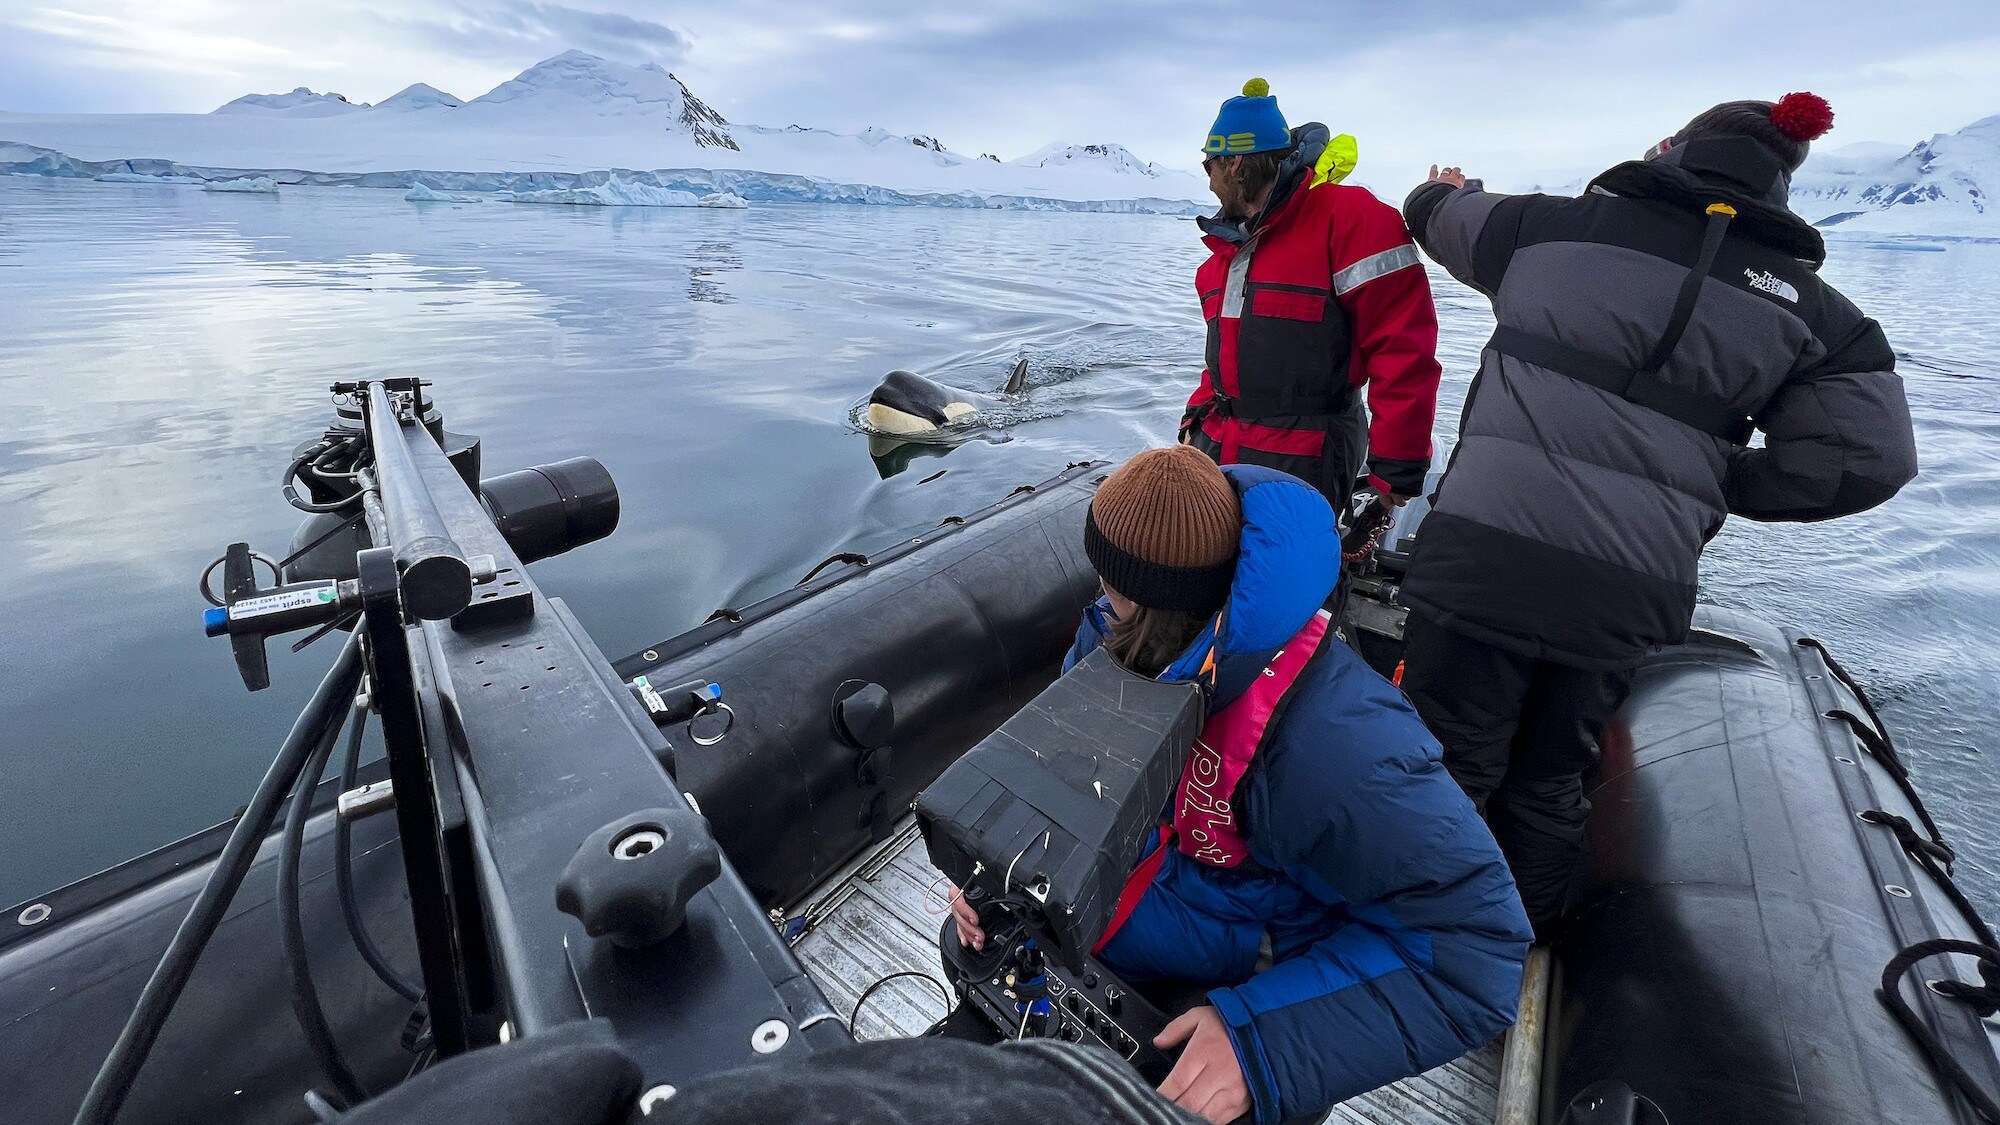 Tom Walker operating the gimbal camera as a killer whale swims past the boat. (credit: National Geographic for Disney+/Calumn Stronach)